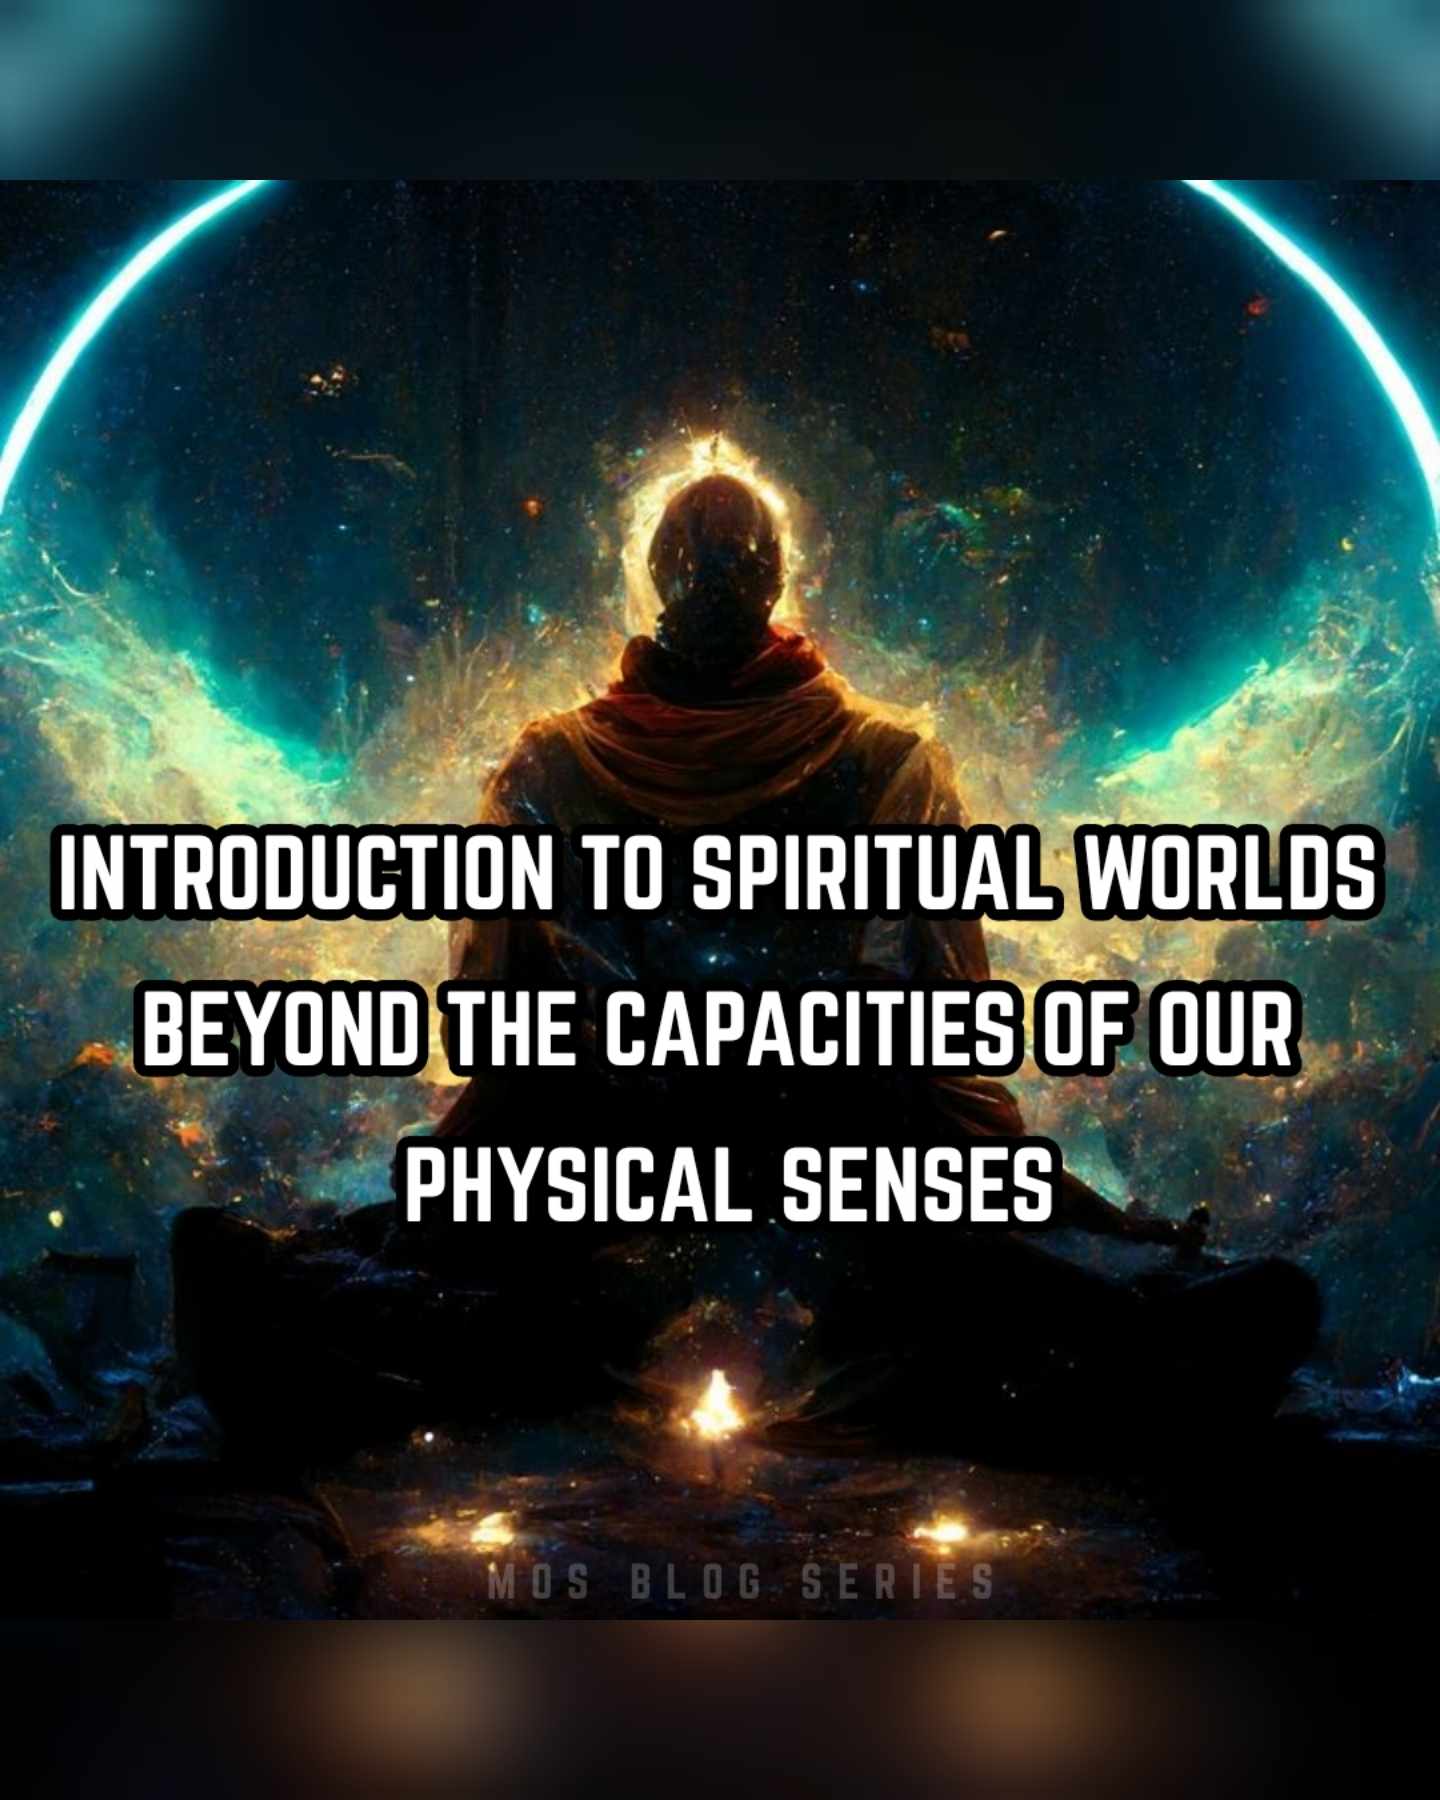 Introduction to Spiritual Worlds Beyond the Capacities of our Physical Senses